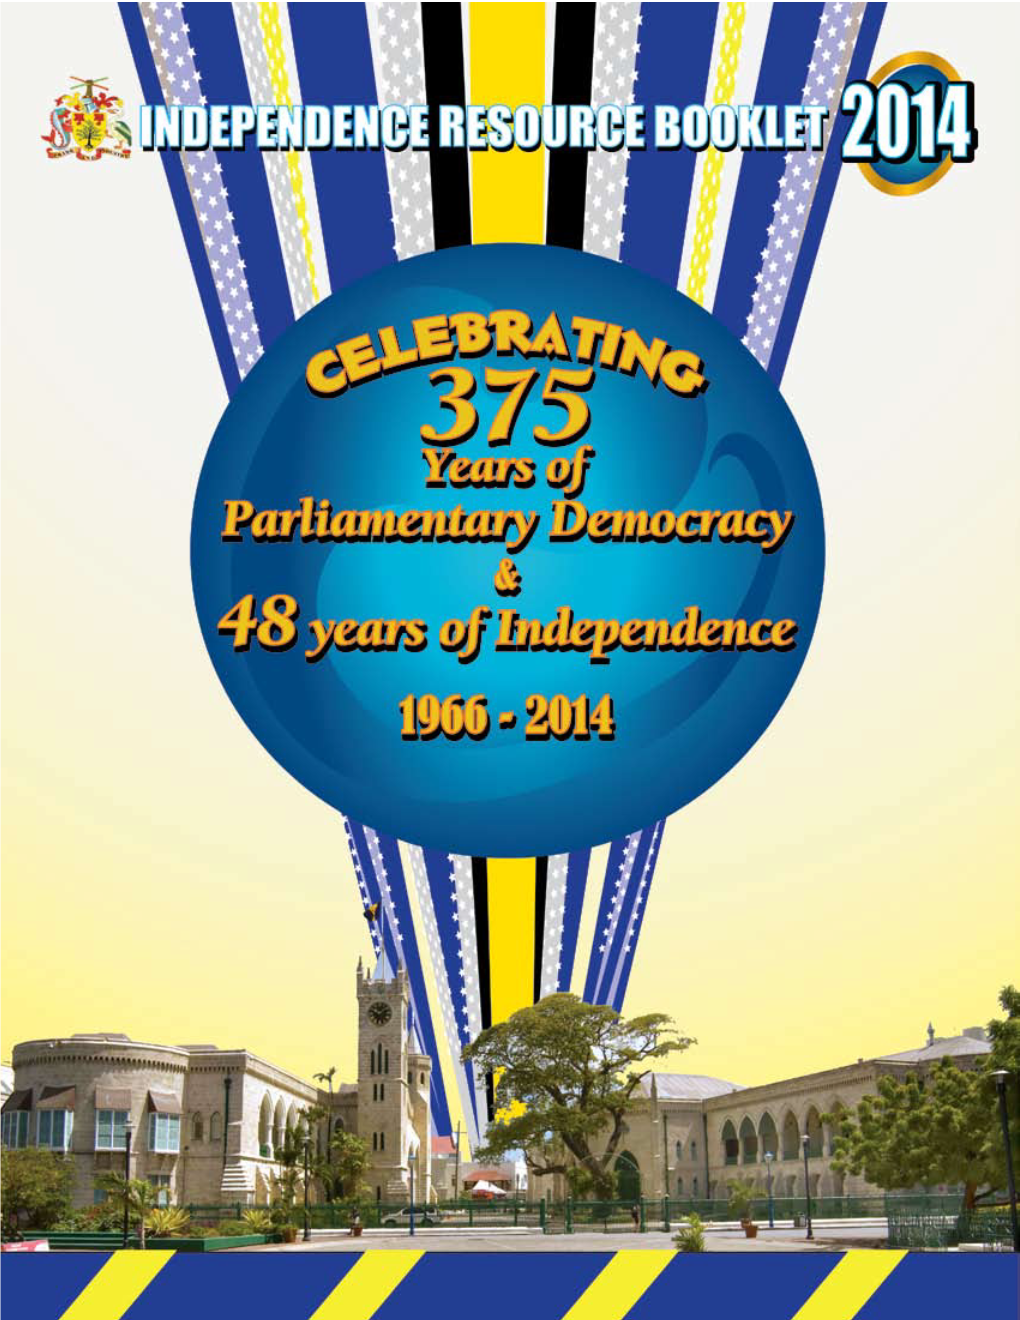 Celebrating 375 Years of Parliamentary Democracy and 48